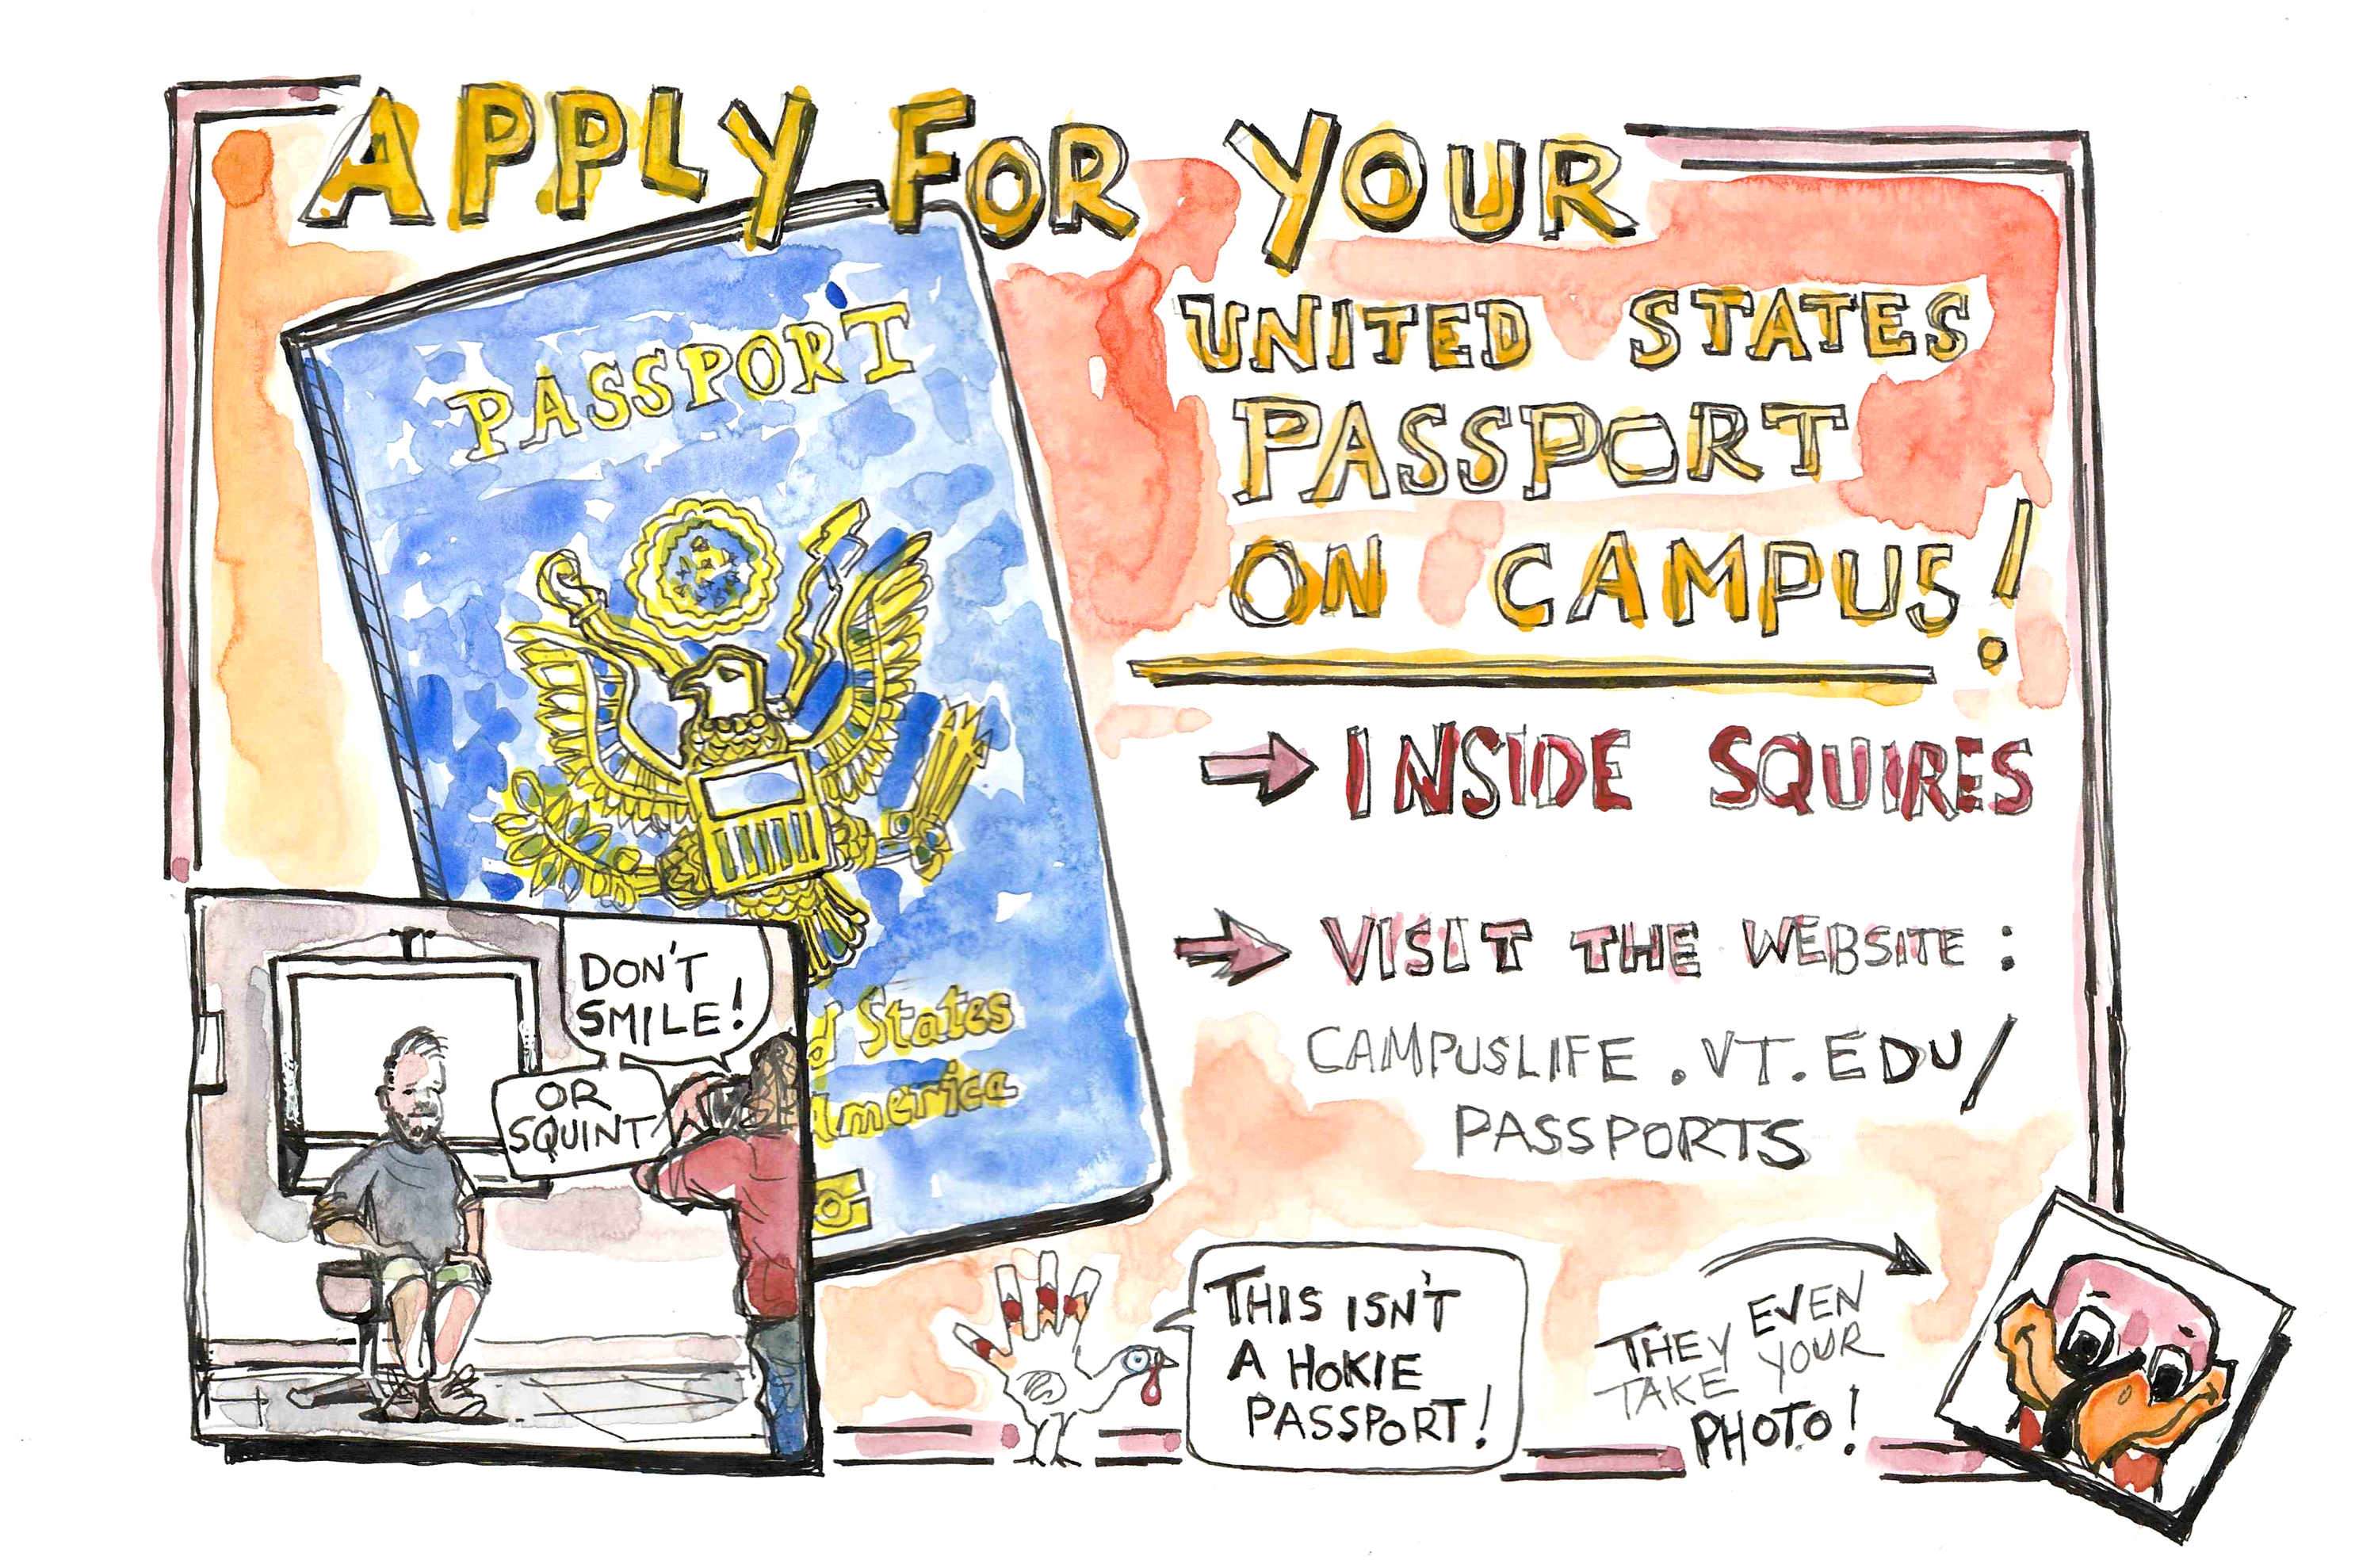 There's U.S. Passport support on campus! (00166) 